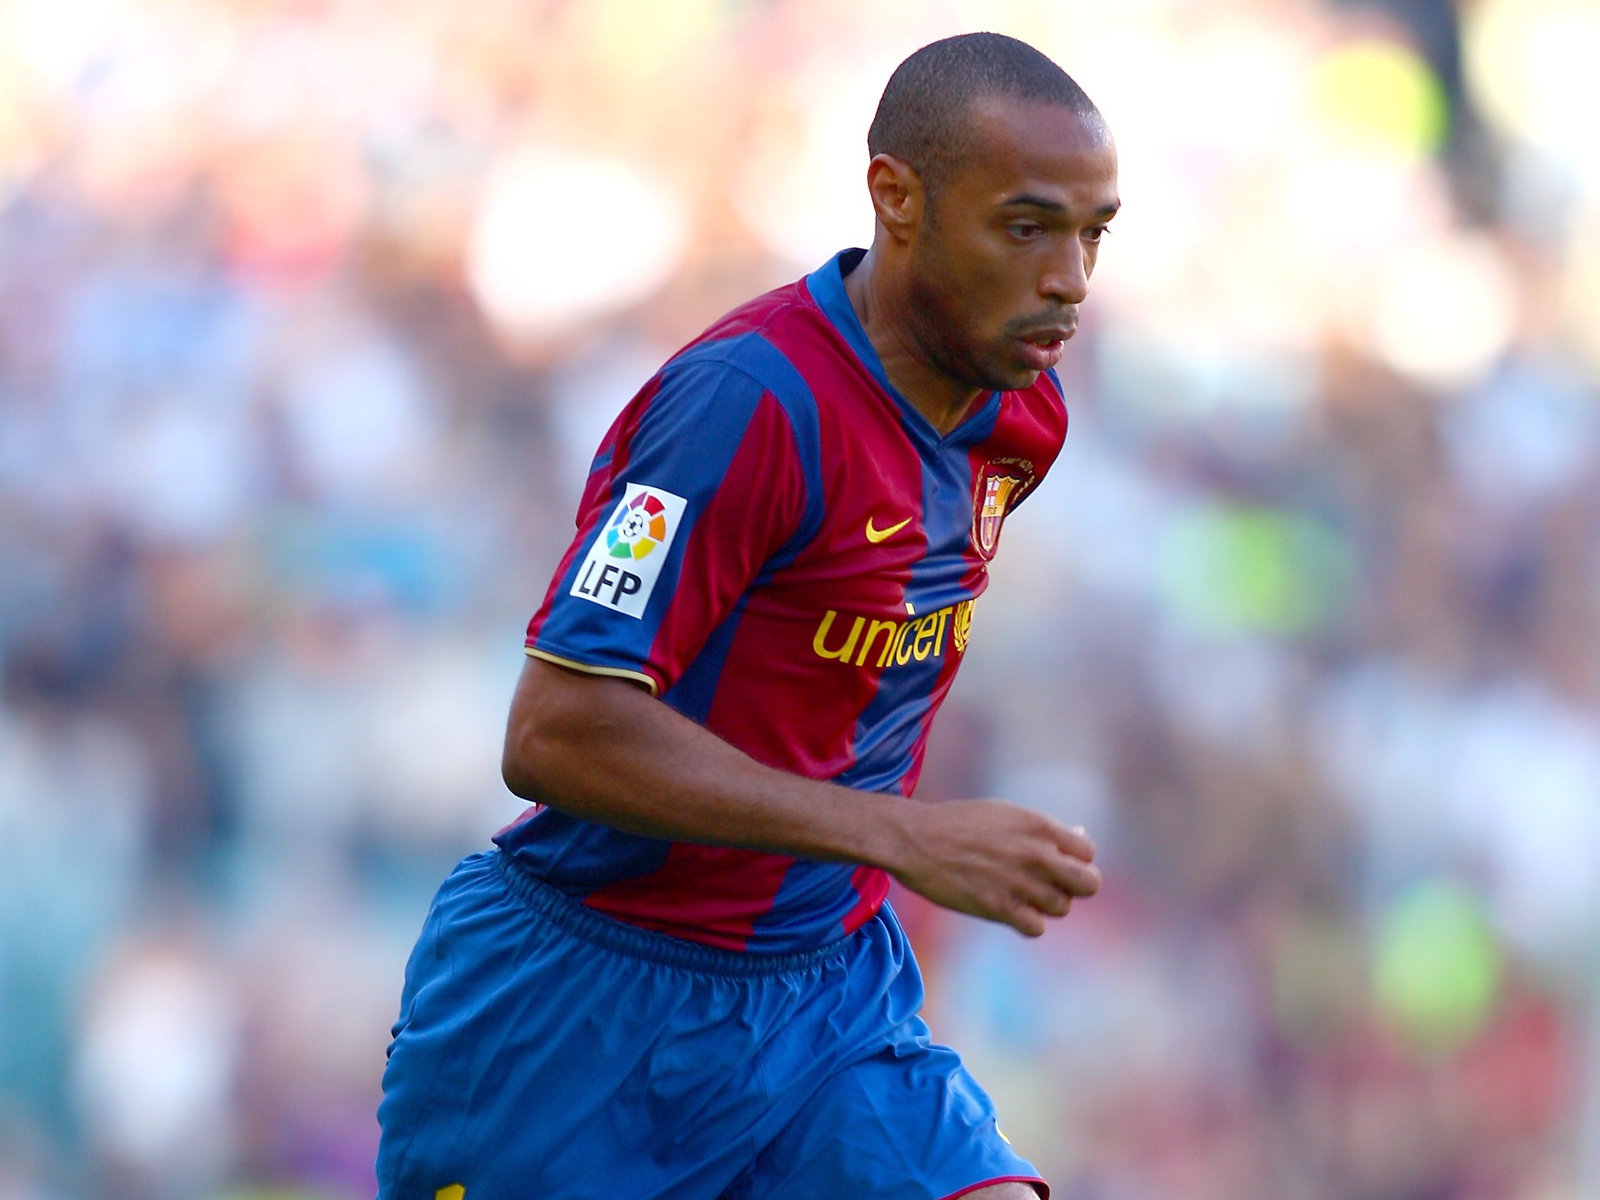 Thierry Henry preferred playing for Arsenal than Barcelona chess